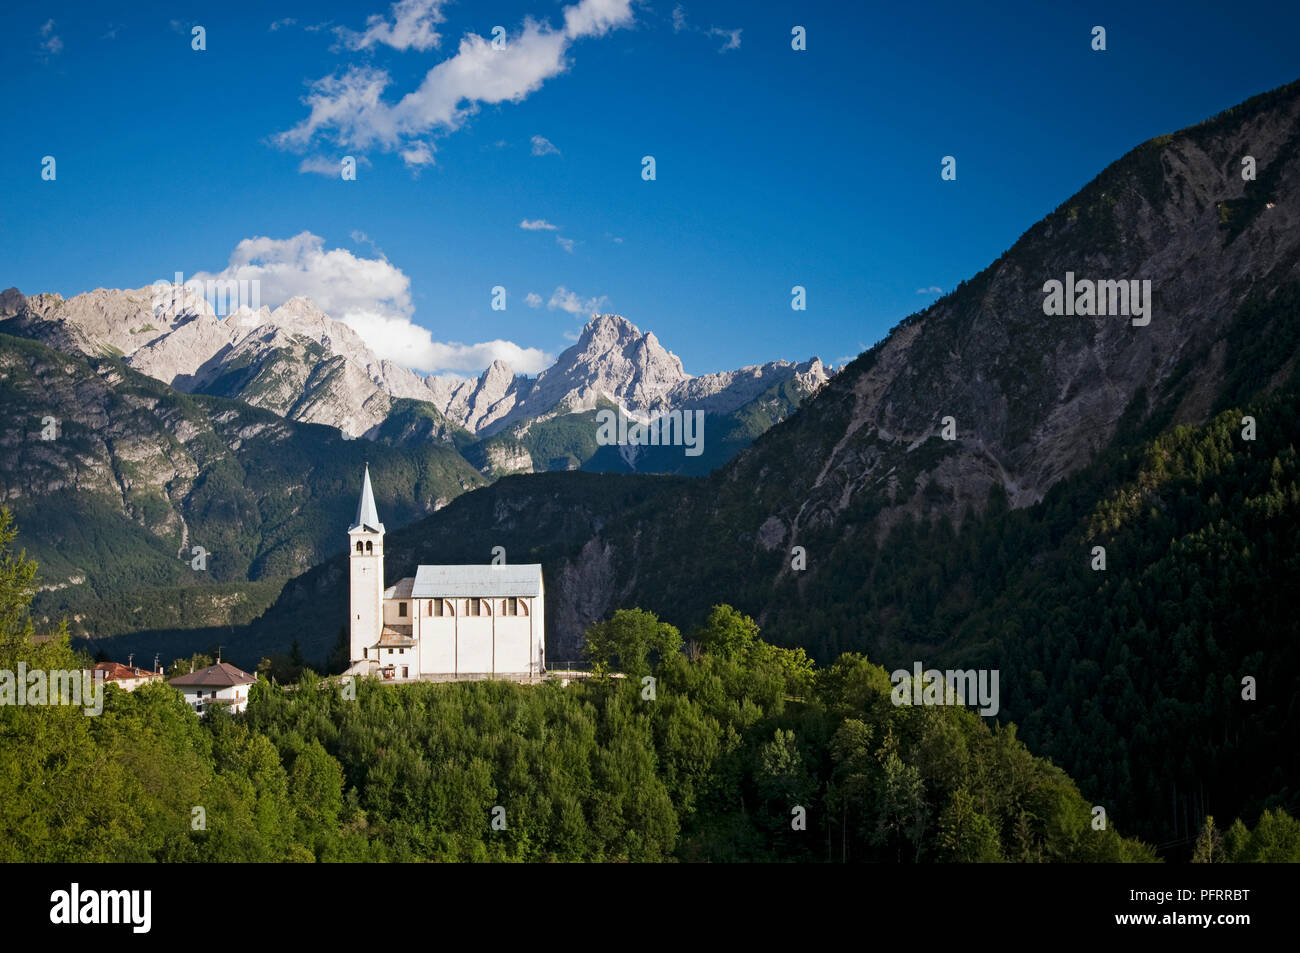 Italy, Veneto, Belluno Province, church in Valle Di Cadore, surrounded by Dolomites mountains Stock Photo